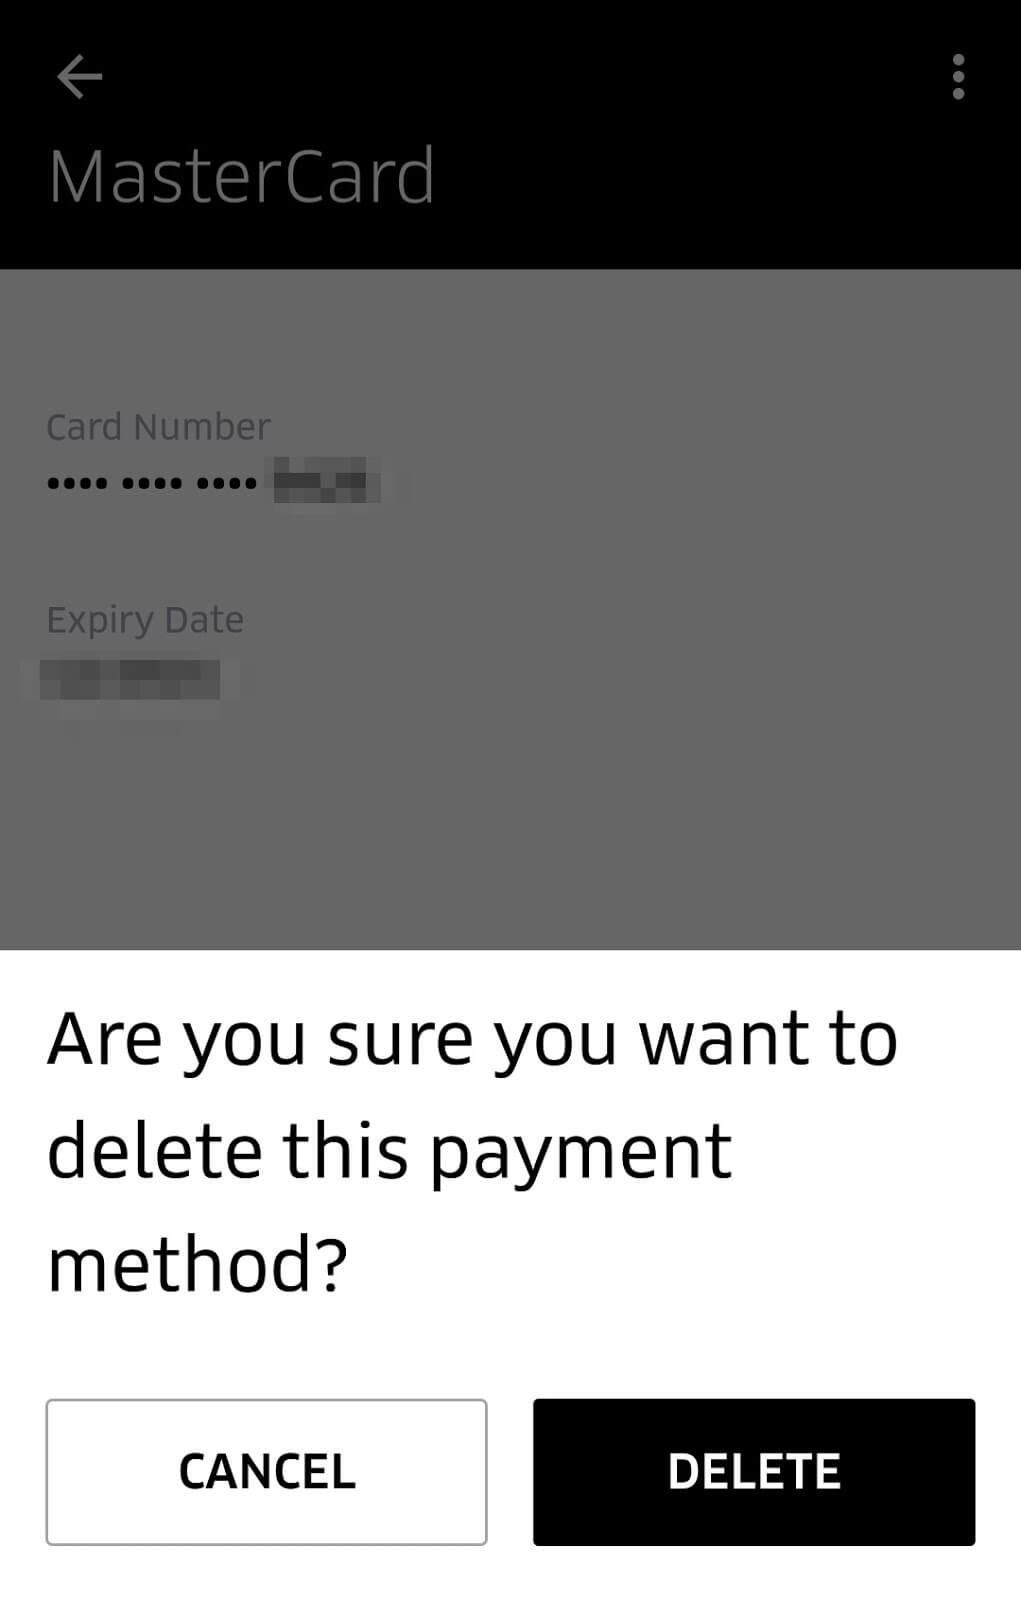 How to Remove Your Credit Card from Uber: confirm deletion